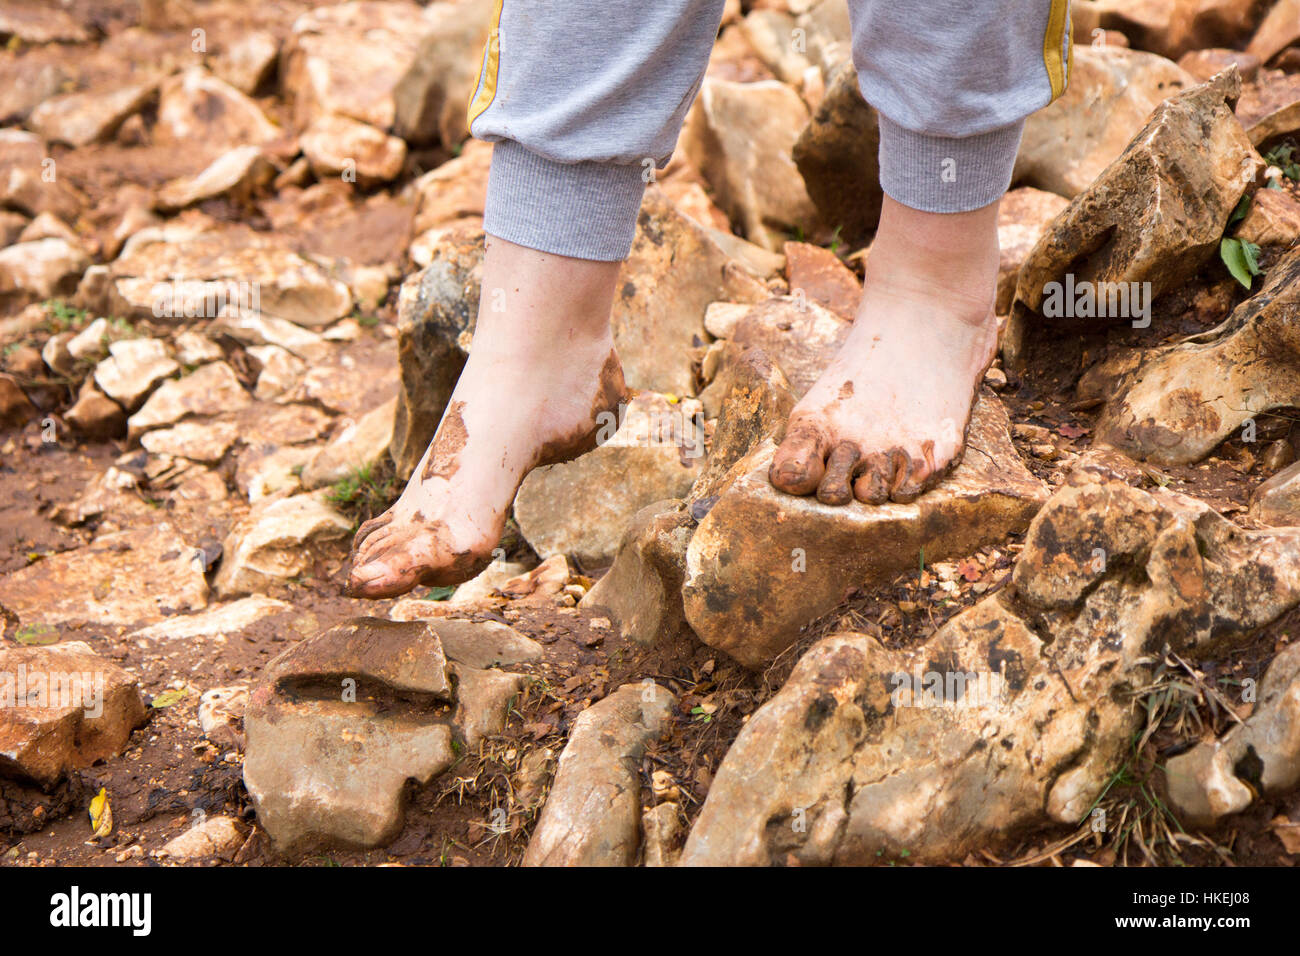 Medjugorje, Bosnia and Herzegovina on 2016/11/12. Female pilgrim walking barefoot to the top of Podbrdo Mountain (Mount of Apparitions). Stock Photo